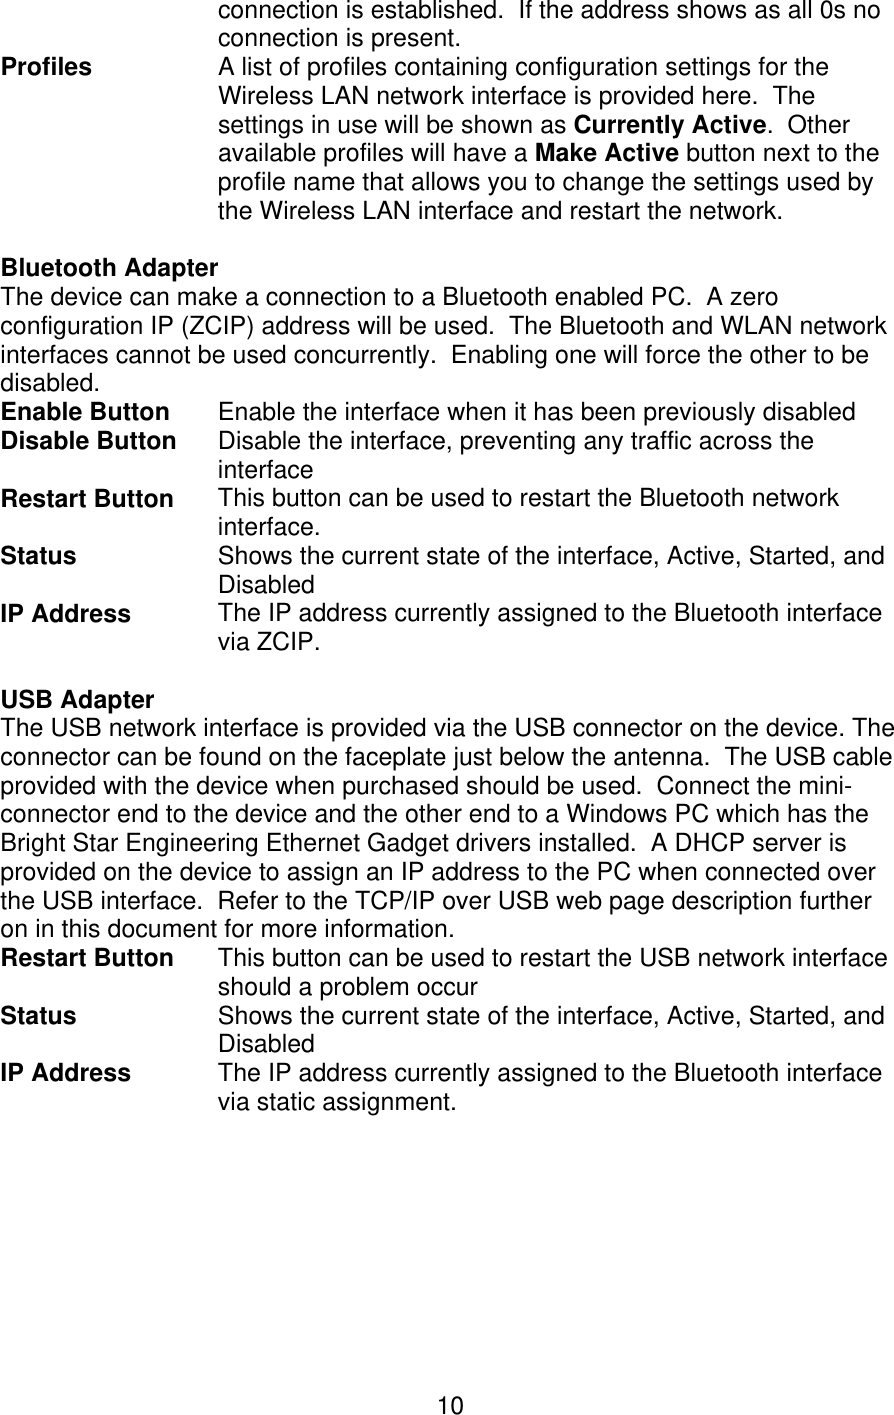   10connection is established.  If the address shows as all 0s no connection is present. Profiles A list of profiles containing configuration settings for the Wireless LAN network interface is provided here.  The settings in use will be shown as Currently Active.  Other available profiles will have a Make Active button next to the profile name that allows you to change the settings used by the Wireless LAN interface and restart the network.   Bluetooth Adapter  The device can make a connection to a Bluetooth enabled PC.  A zero configuration IP (ZCIP) address will be used.  The Bluetooth and WLAN network interfaces cannot be used concurrently.  Enabling one will force the other to be disabled. Enable Button  Enable the interface when it has been previously disabled Disable Button  Disable the interface, preventing any traffic across the interface Restart Button This button can be used to restart the Bluetooth network interface. Status  Shows the current state of the interface, Active, Started, and Disabled IP Address  The IP address currently assigned to the Bluetooth interface via ZCIP.  USB Adapter  The USB network interface is provided via the USB connector on the device. The connector can be found on the faceplate just below the antenna.  The USB cable provided with the device when purchased should be used.  Connect the mini-connector end to the device and the other end to a Windows PC which has the Bright Star Engineering Ethernet Gadget drivers installed.  A DHCP server is provided on the device to assign an IP address to the PC when connected over the USB interface.  Refer to the TCP/IP over USB web page description further on in this document for more information. Restart Button  This button can be used to restart the USB network interface should a problem occur Status  Shows the current state of the interface, Active, Started, and Disabled IP Address  The IP address currently assigned to the Bluetooth interface via static assignment.  